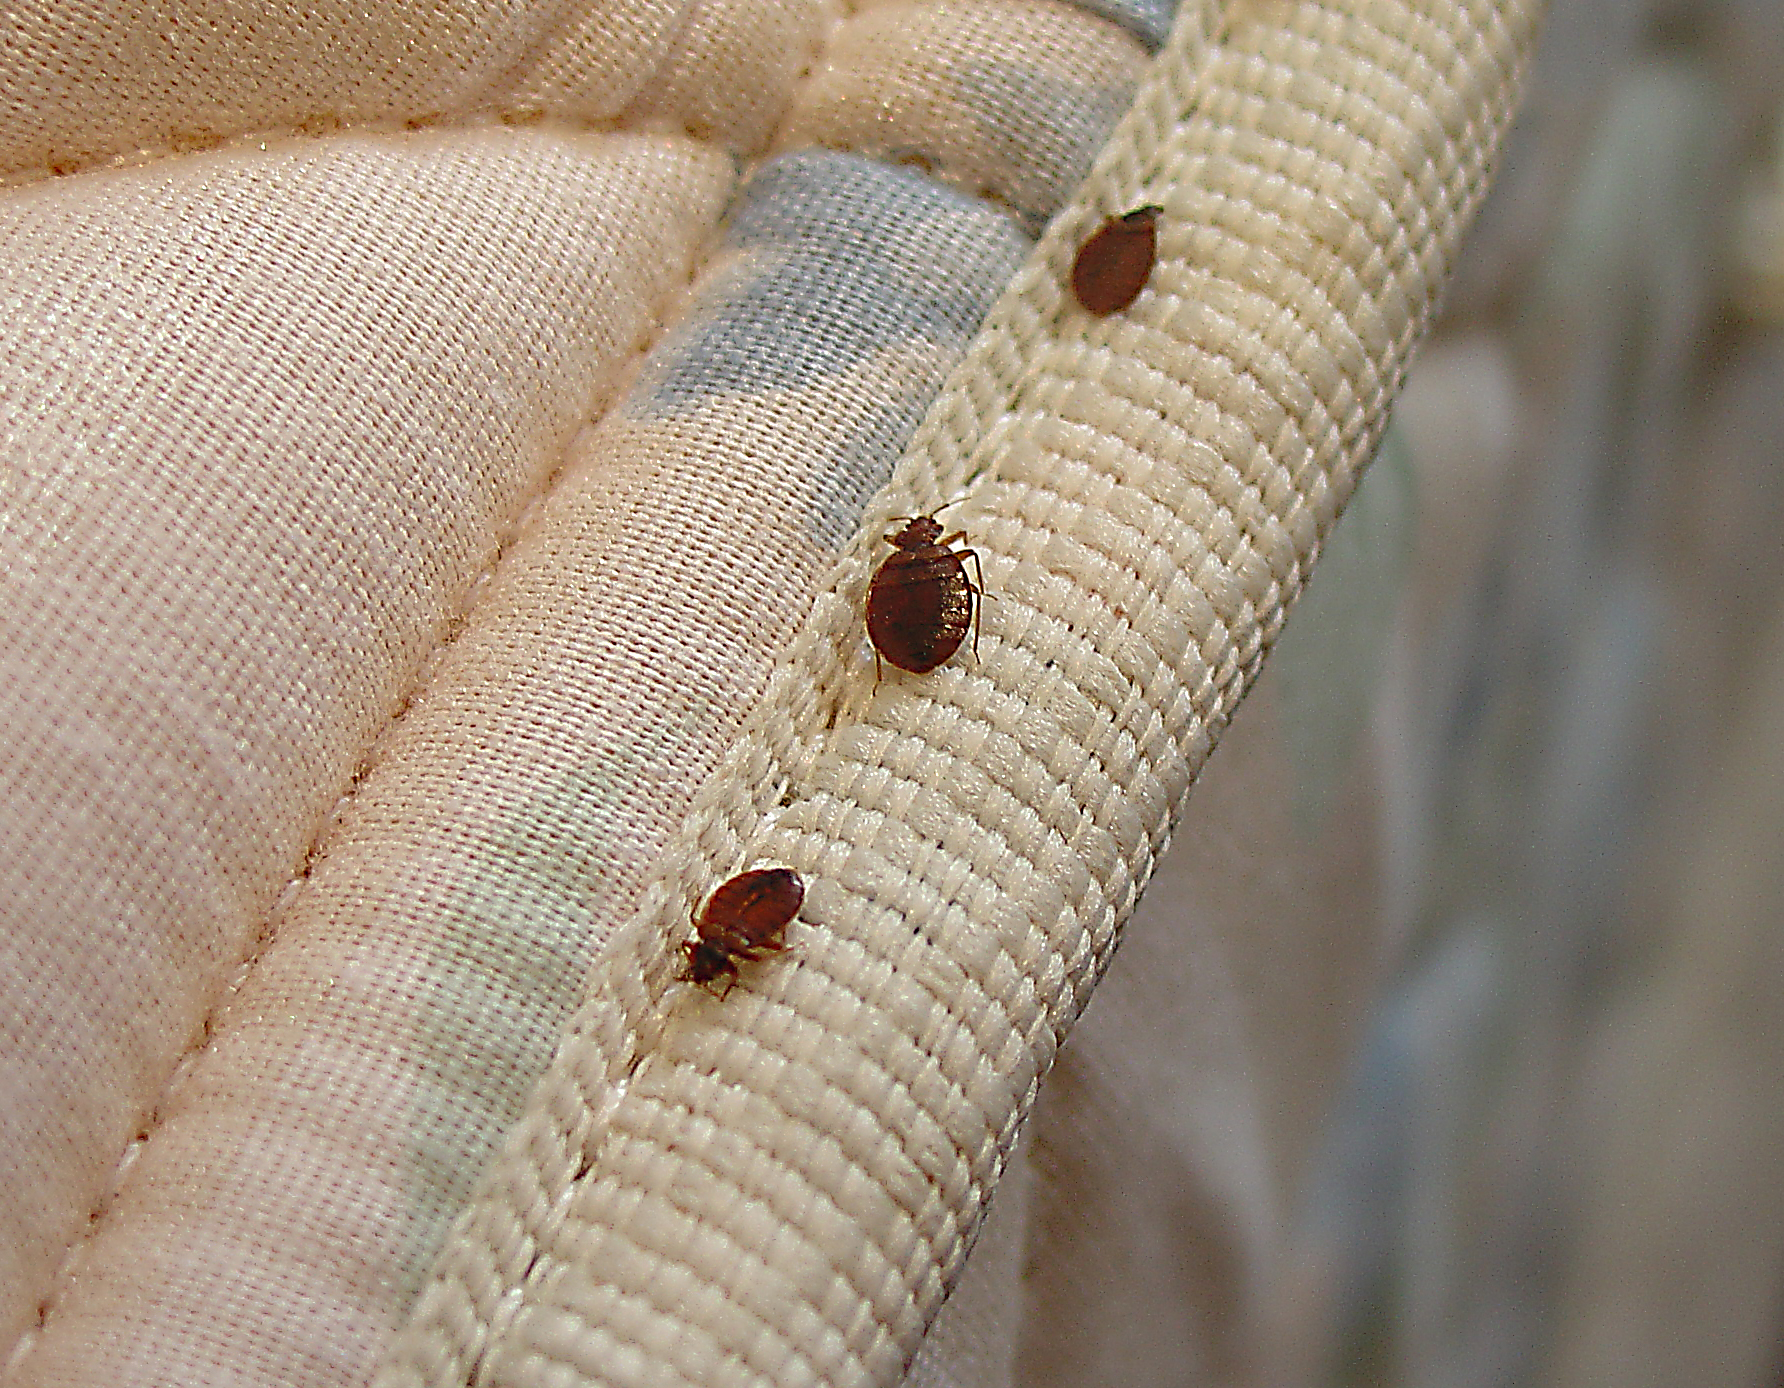 Bed Bugs In Hotel Bedding - Open Press Room